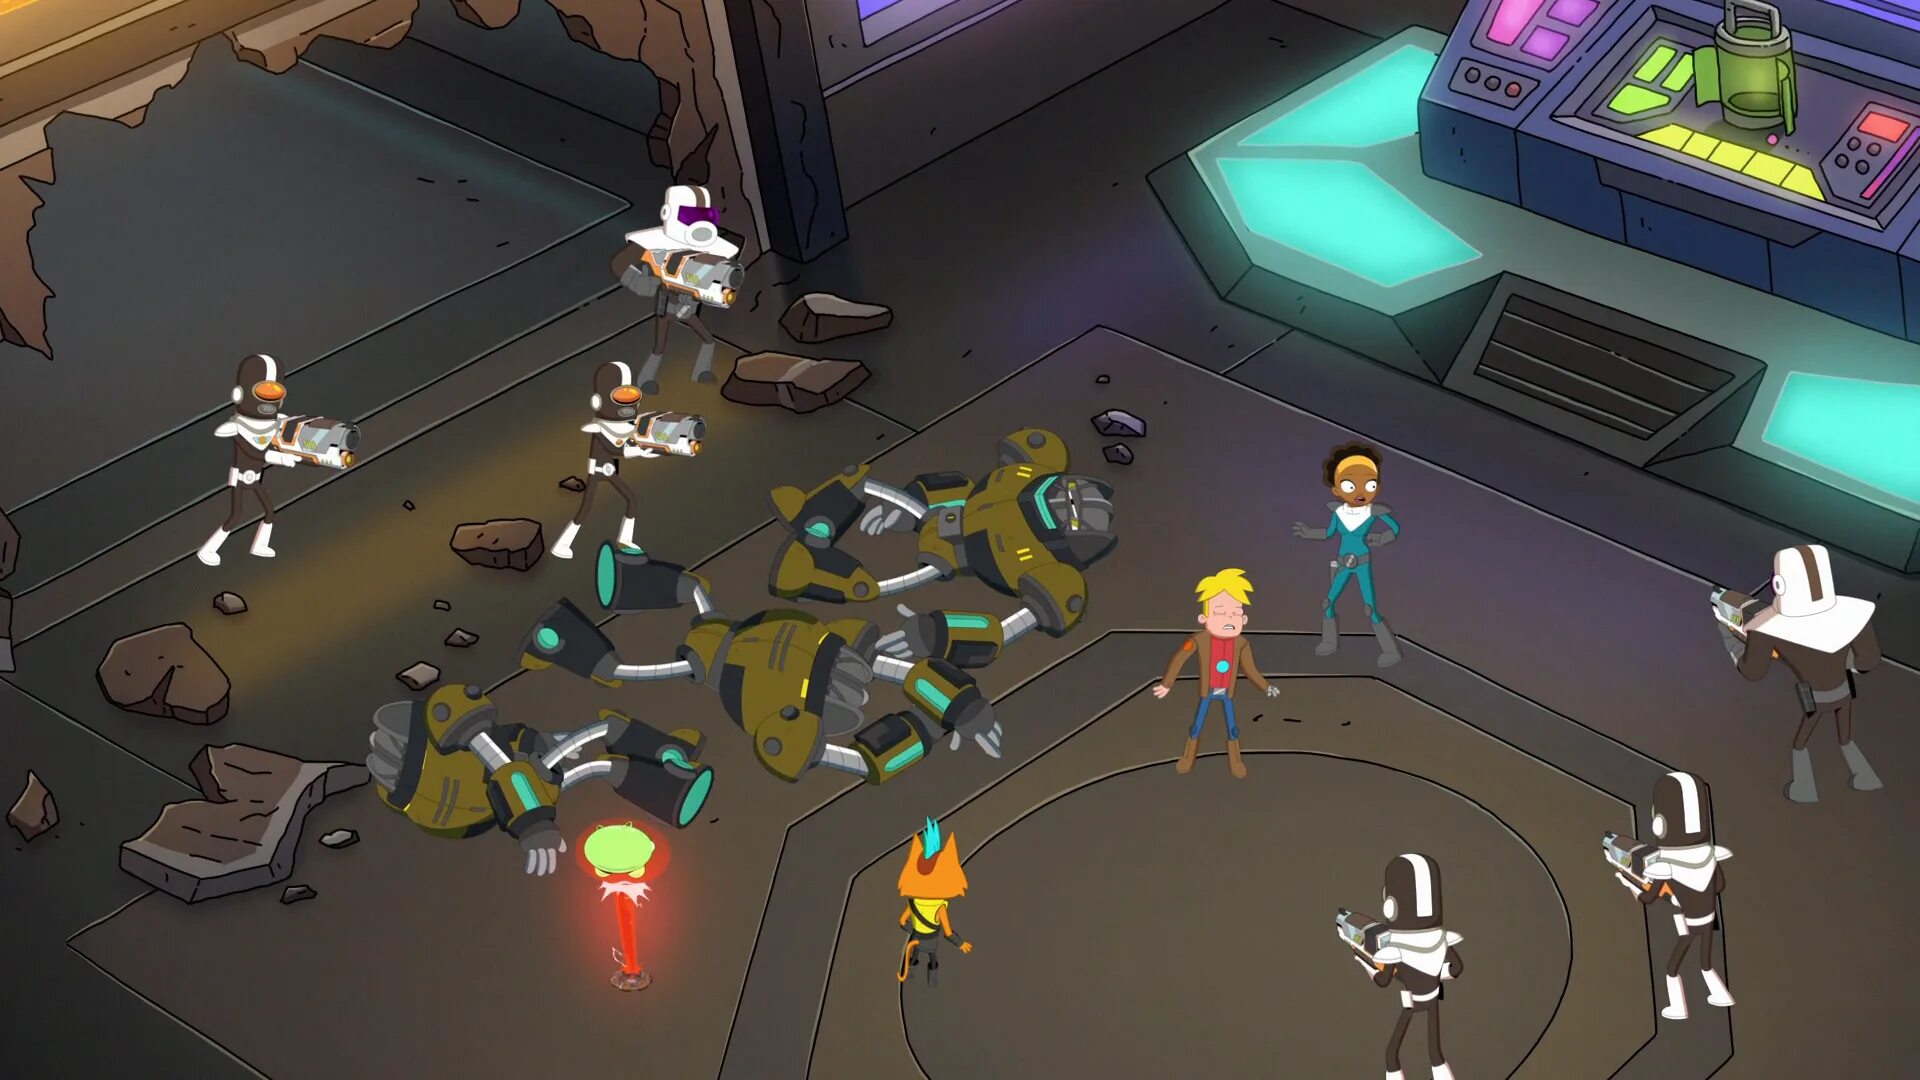 P p s space. Final Space. Final Space VR. Final Space - the Rescue. Band Space VR игра.